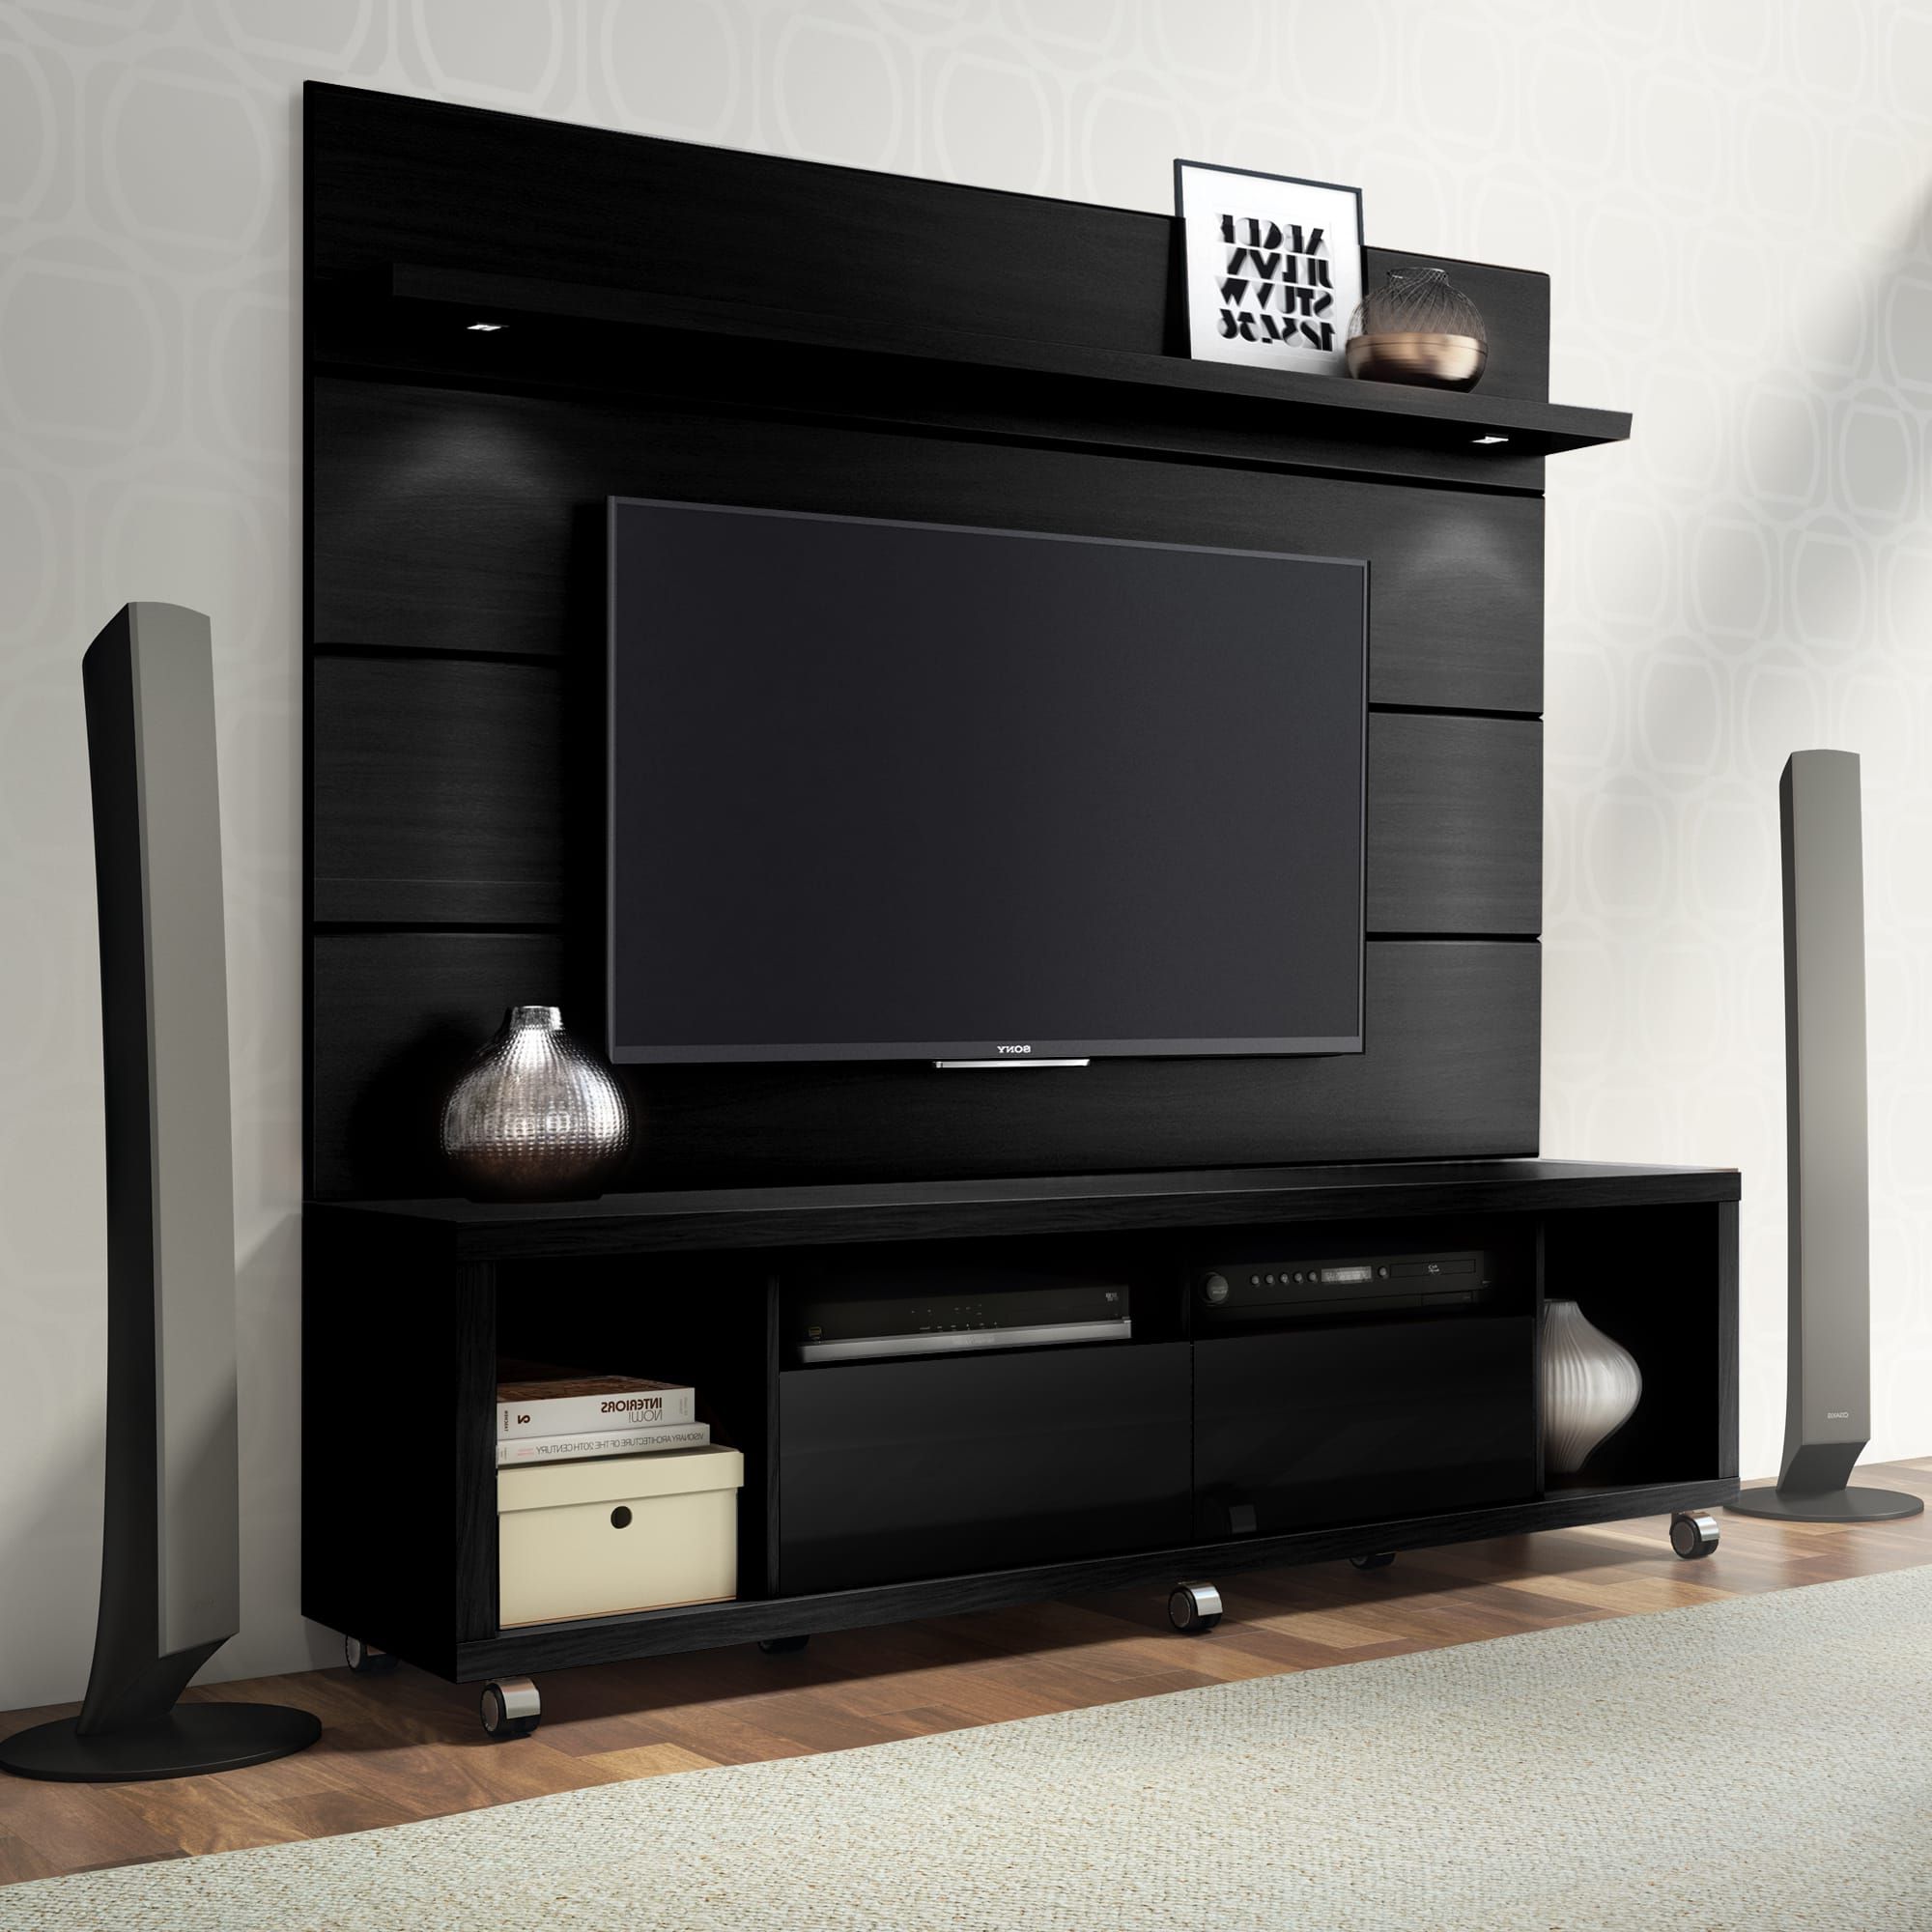 Most Recent Modern Black Tv Stands On Wheels With Cabrini Black Tv Stand & Floating Wall Tv Panel W/ (View 3 of 10)